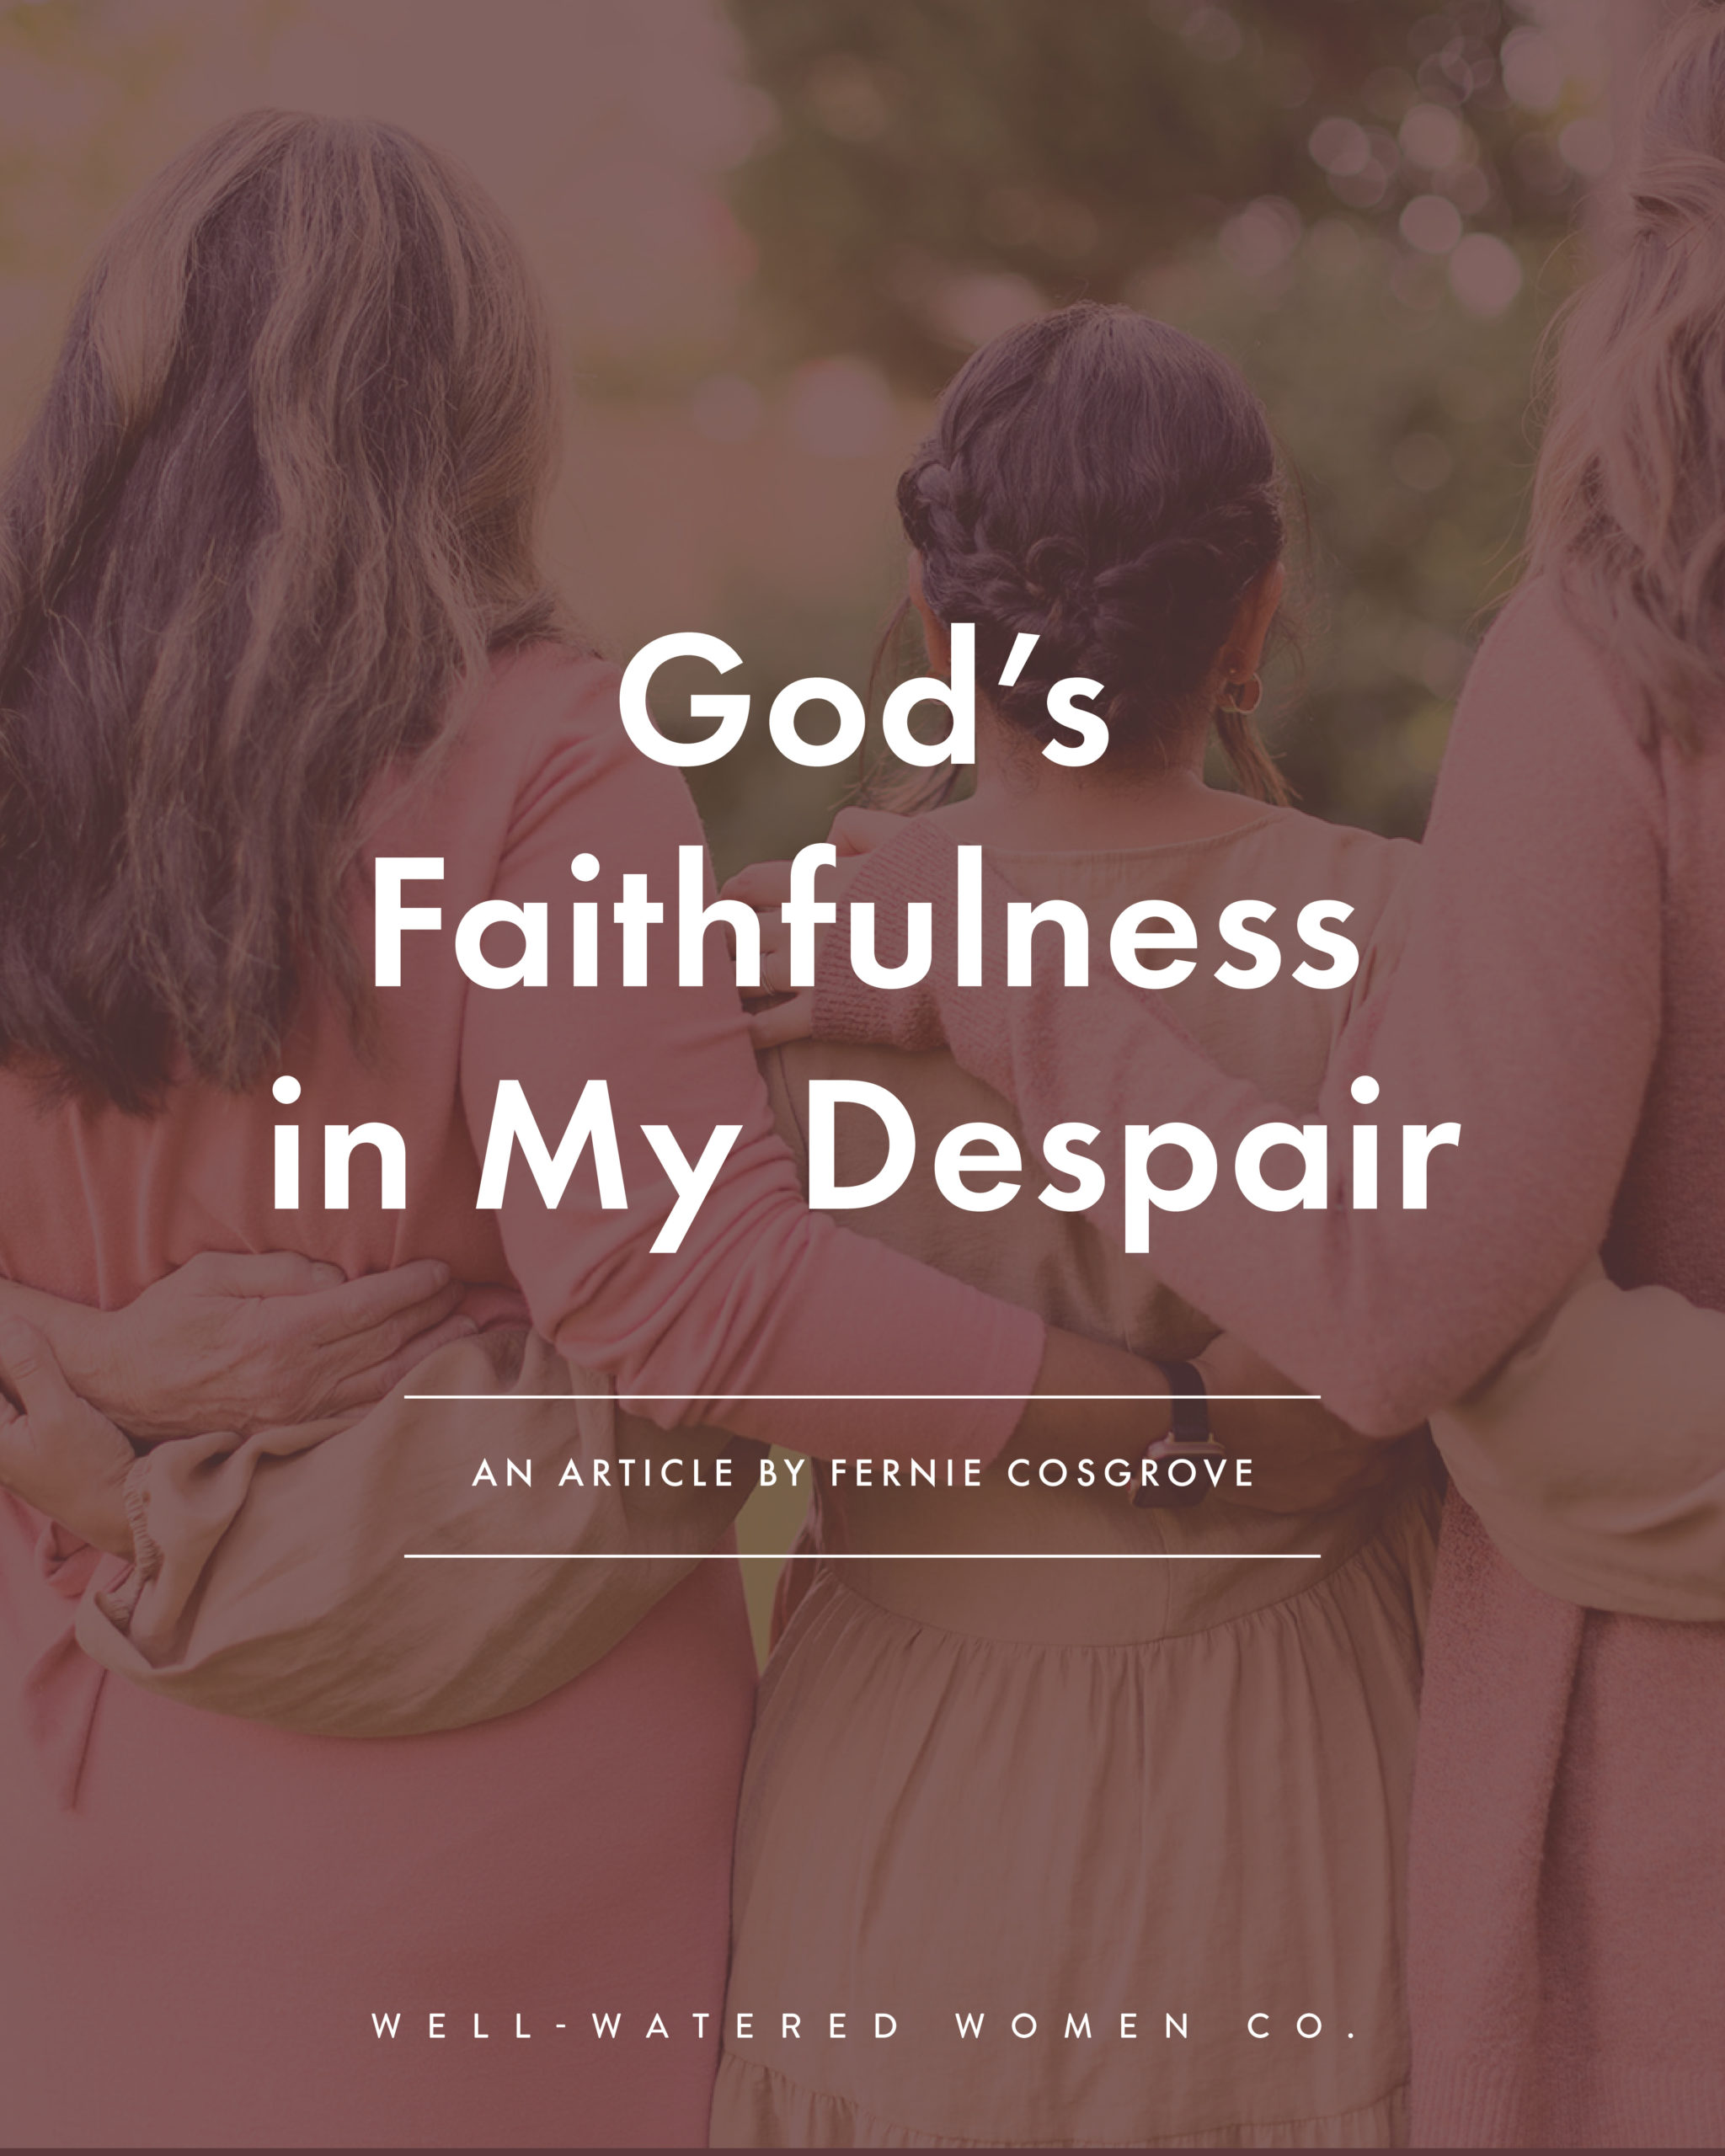 God's Faithfulness in My Despair - an article from Well-Watered Women